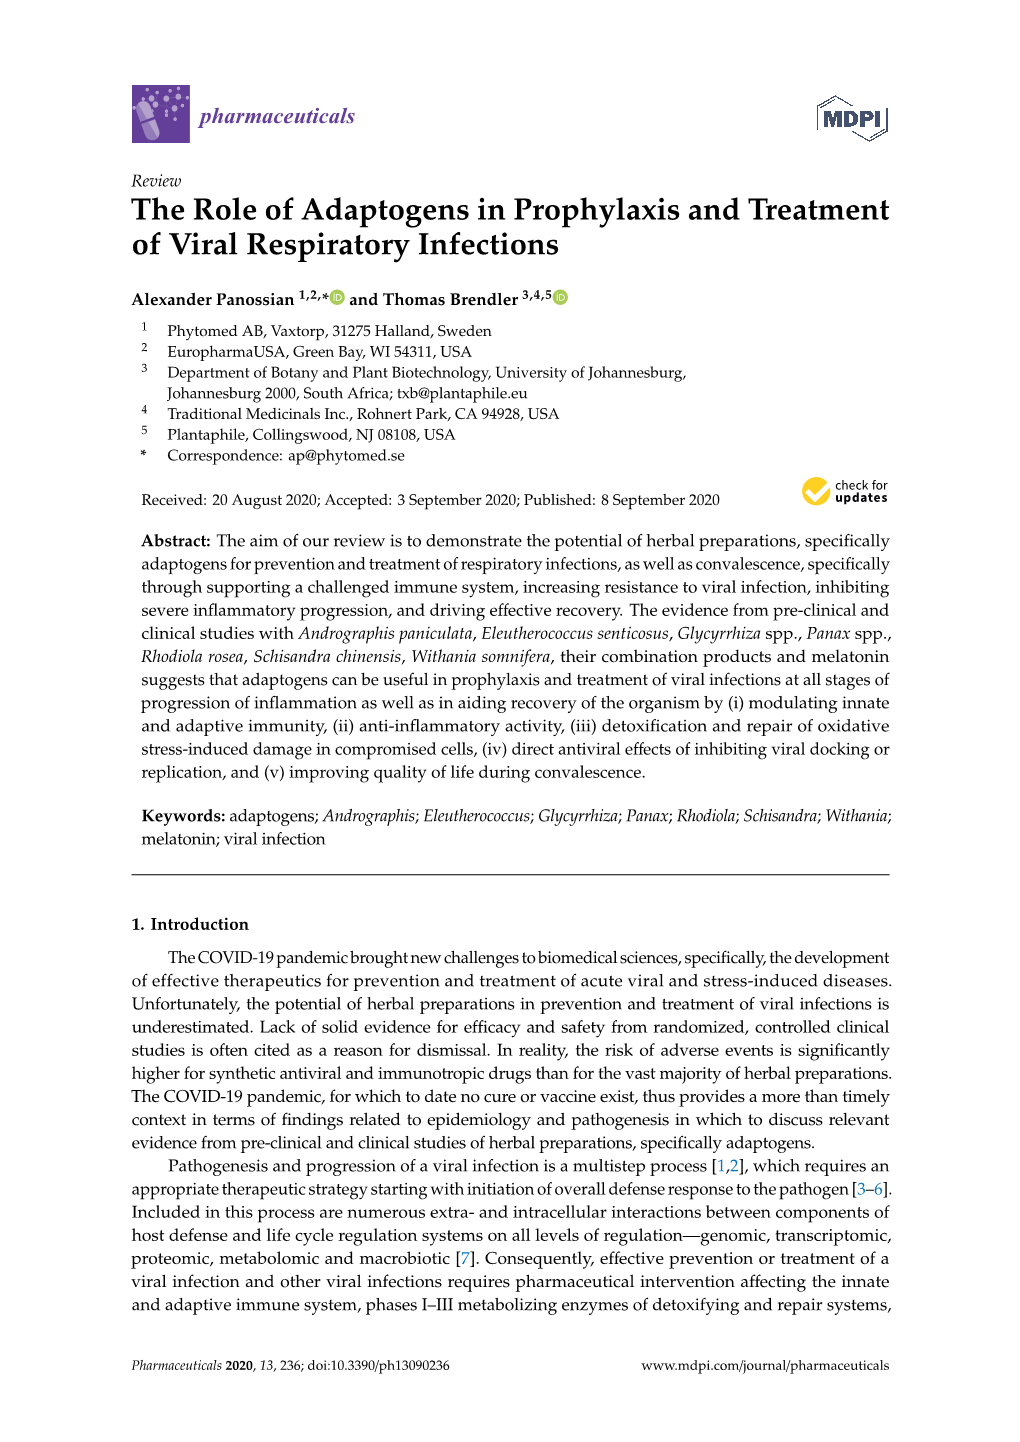 The Role of Adaptogens in Prophylaxis and Treatment of Viral Respiratory Infections